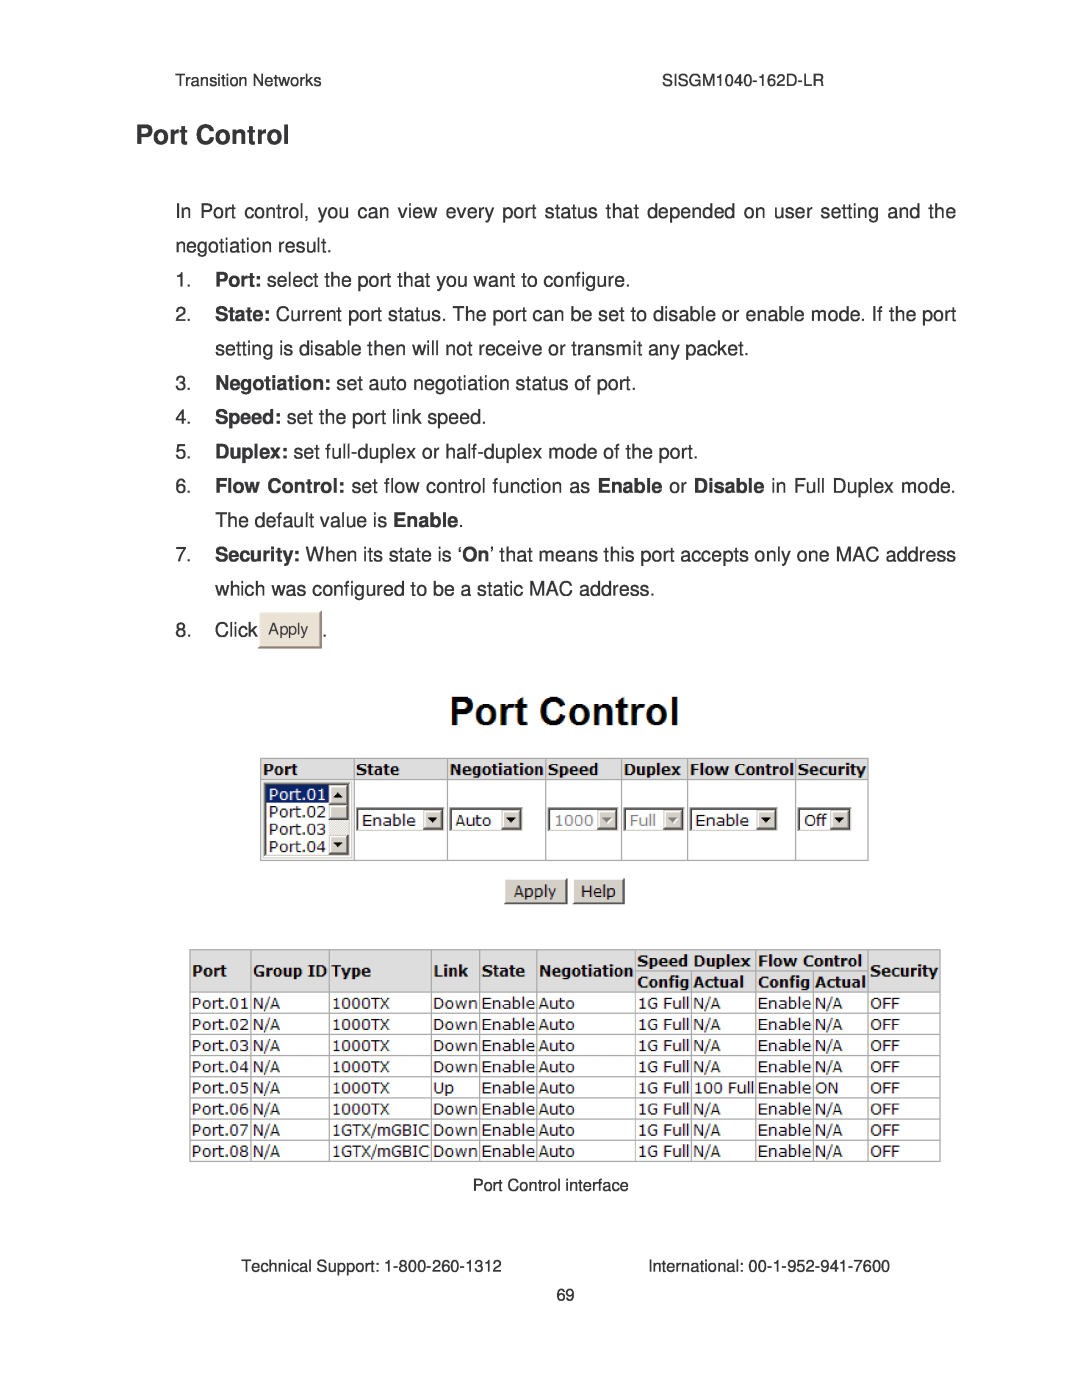 Transition Networks SISGM1040-162D manual Port Control 